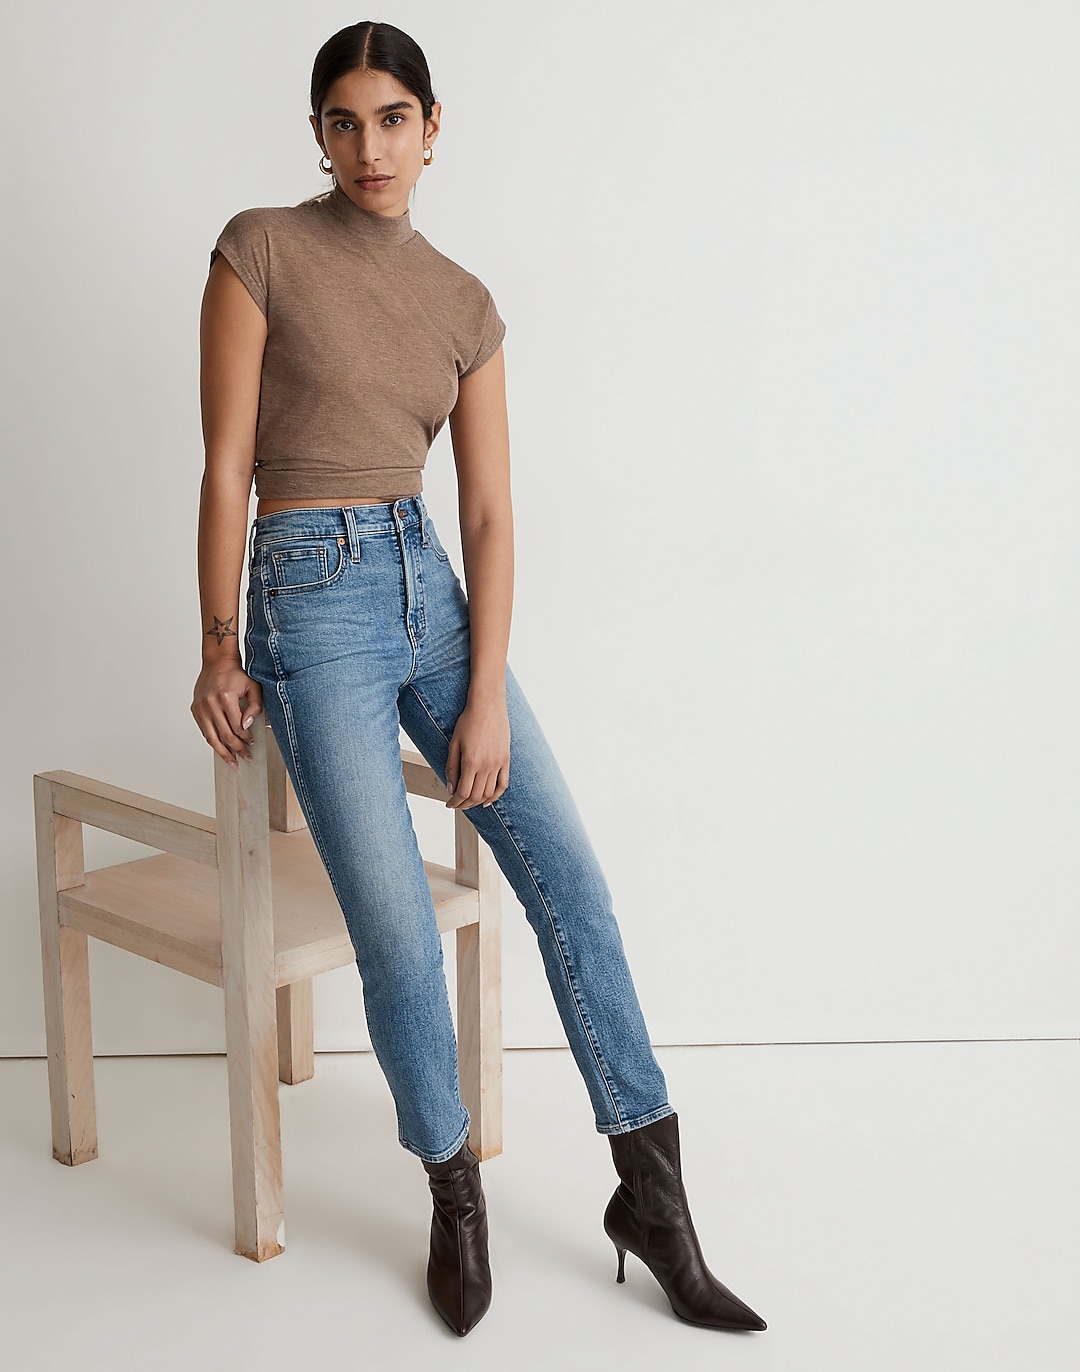 Stovepipe Jeans in Calliston Wash | Madewell